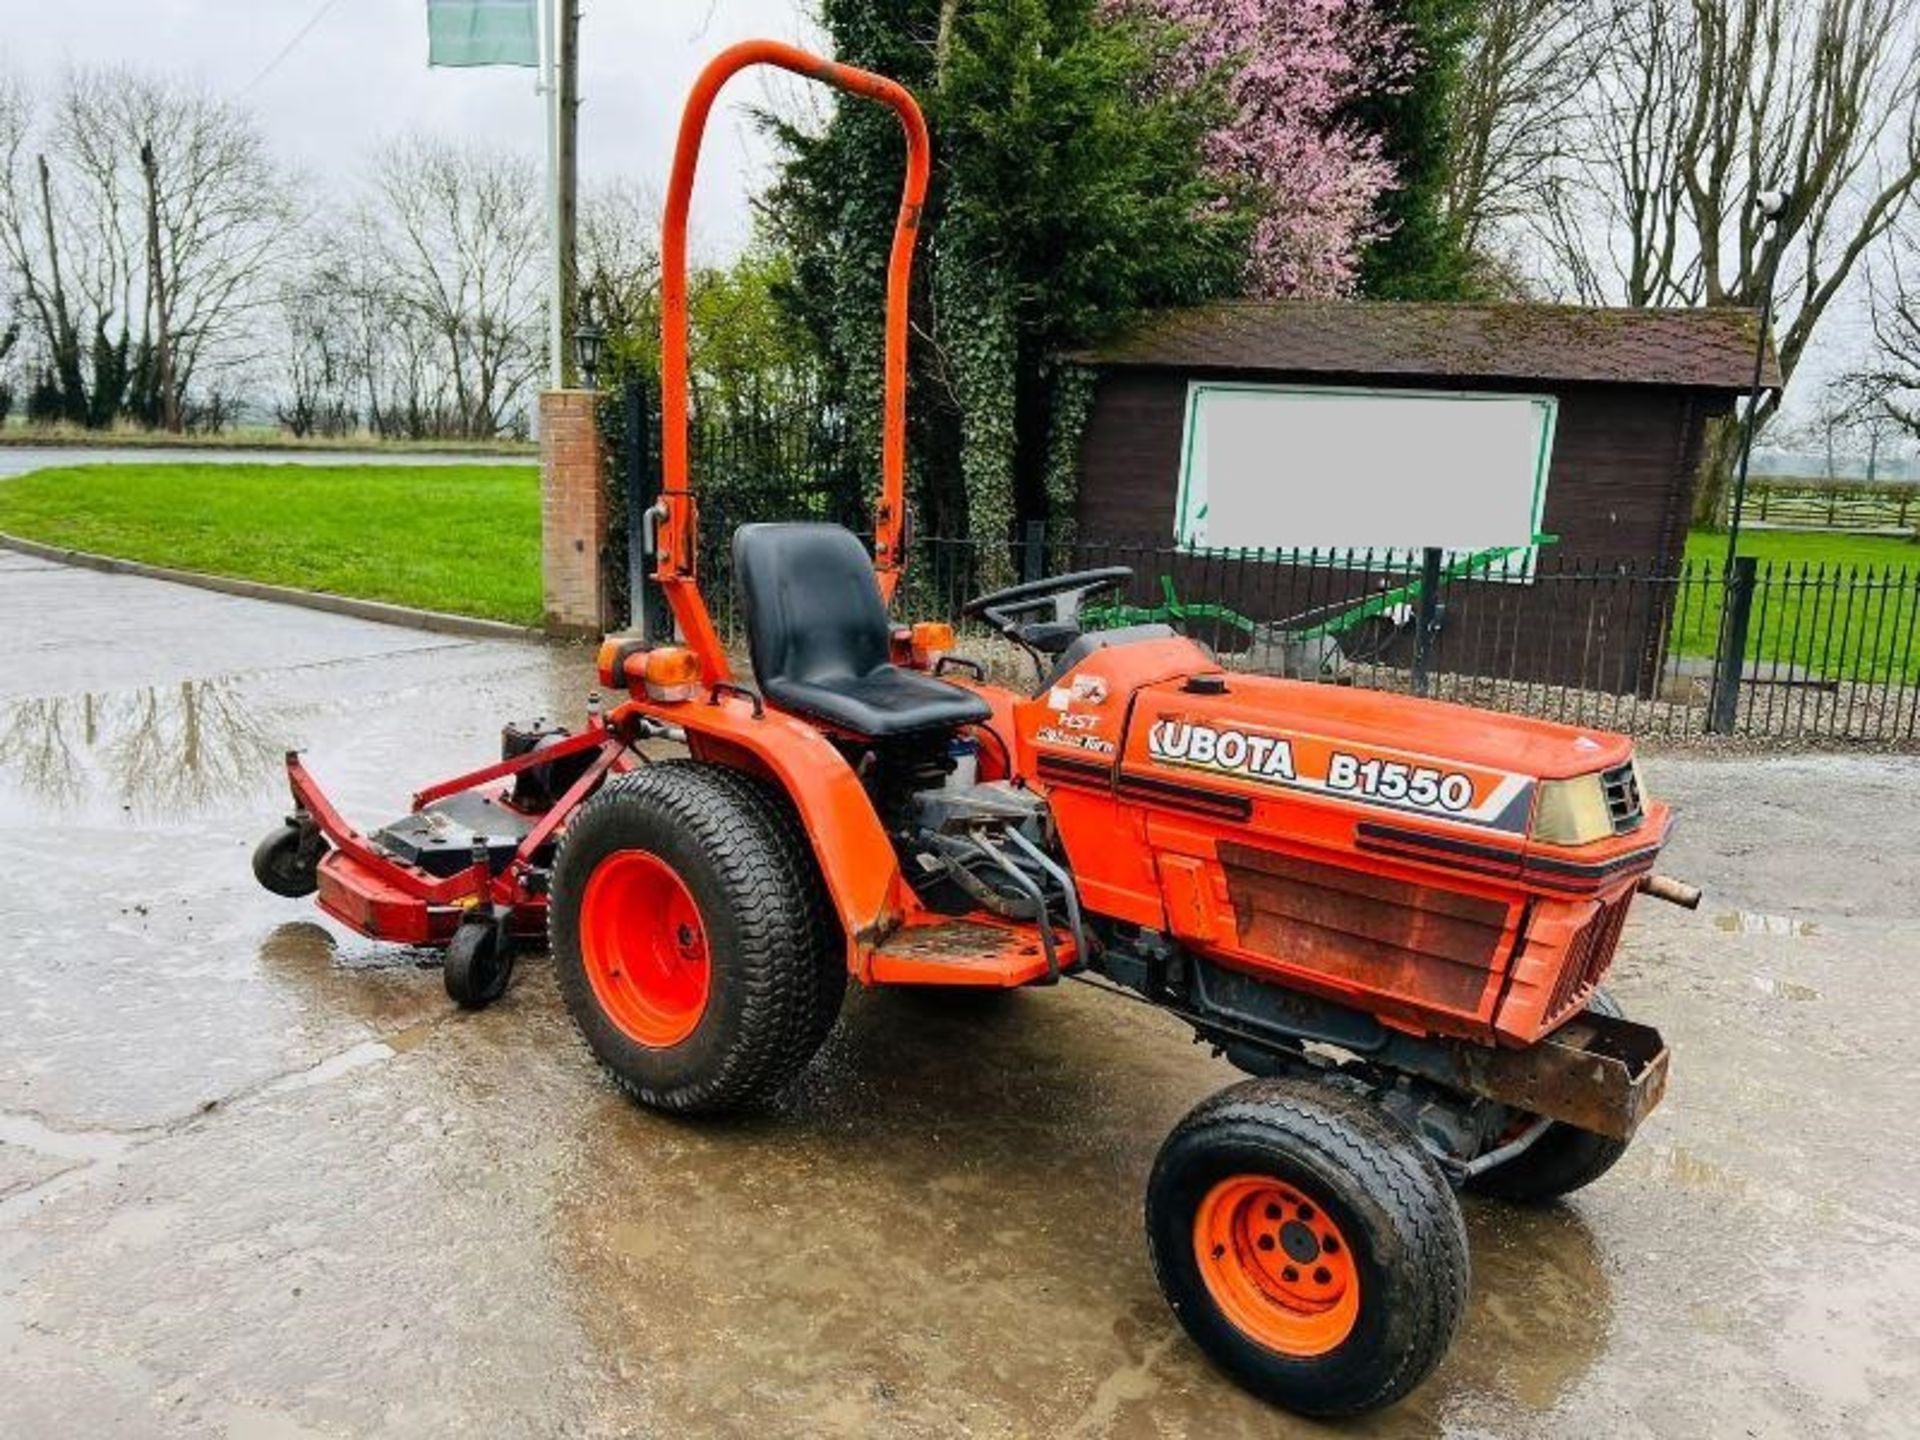 KUBOTA B1550 COMPACT TRACTOR C/W ROLE BAR AND TOPPER - Image 4 of 12